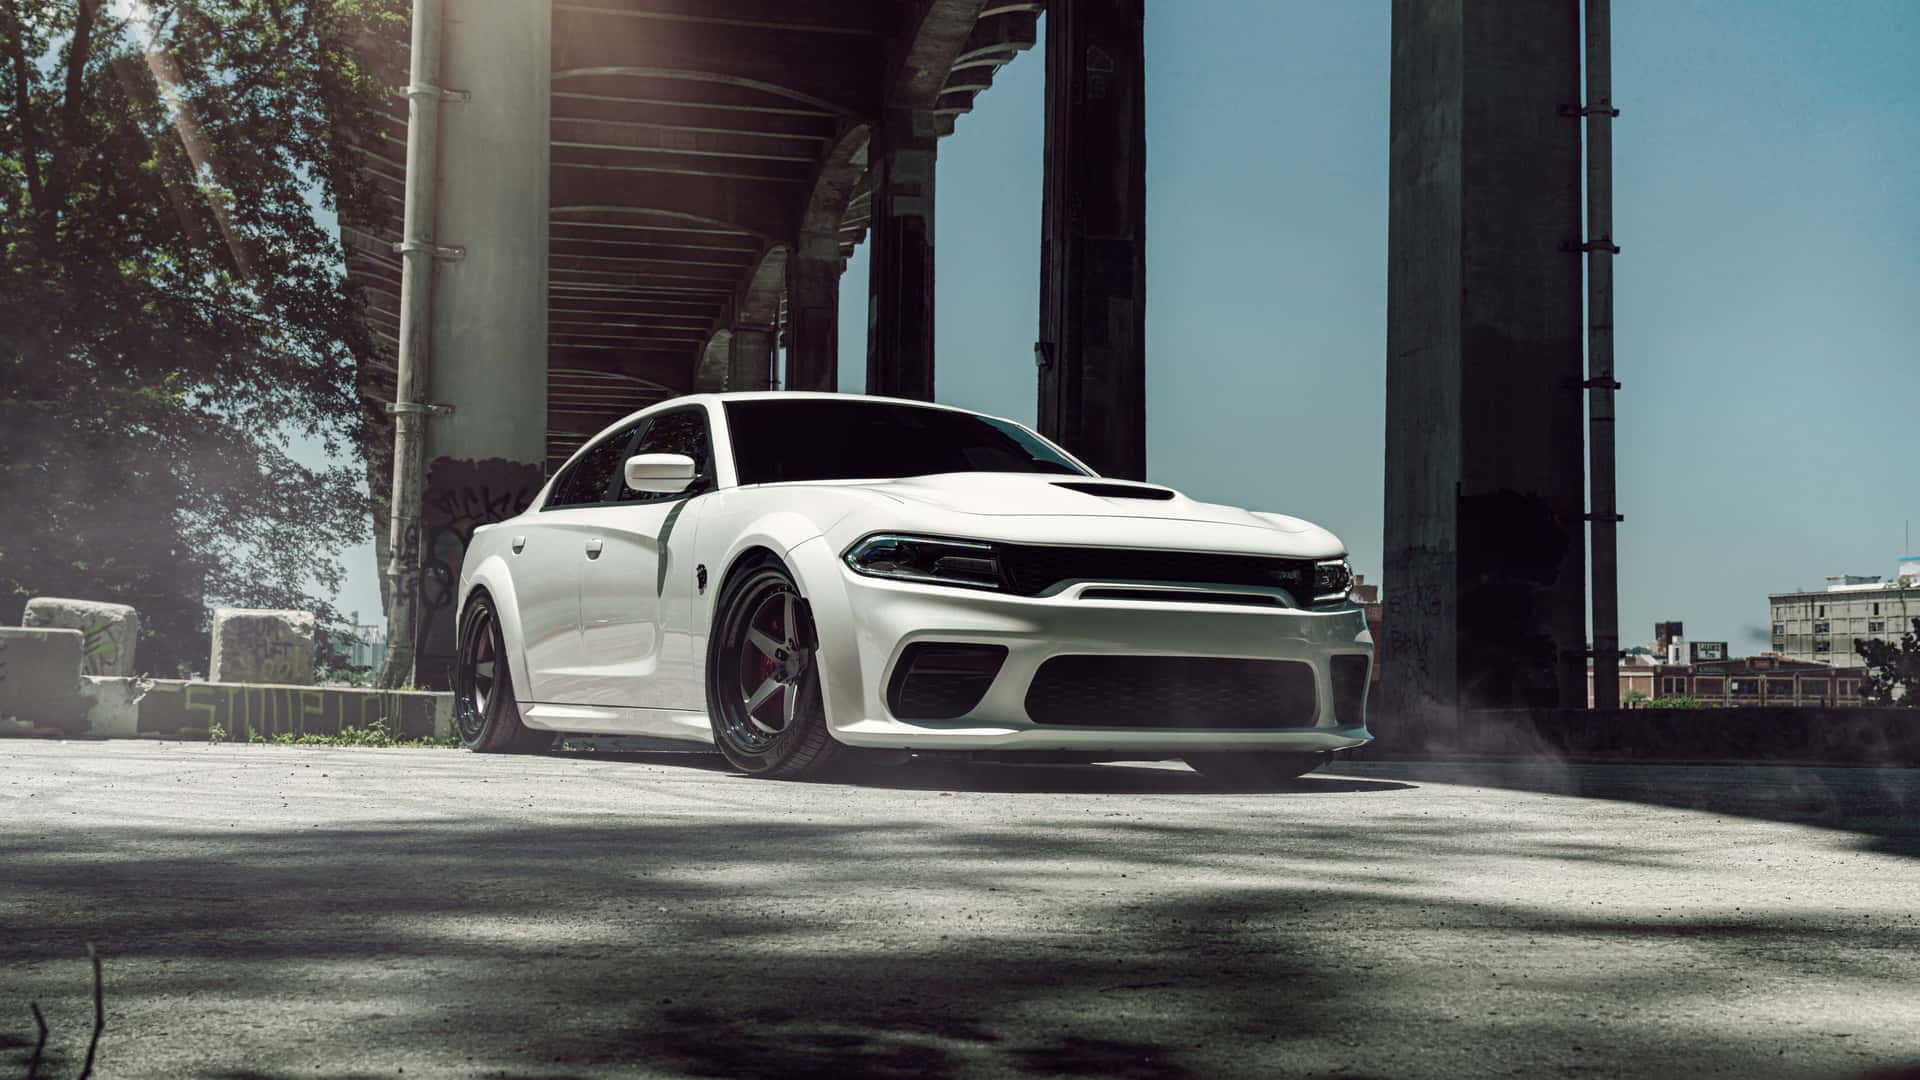 Experience Aggressive Speed And Power With The Dodge Hellcat Background